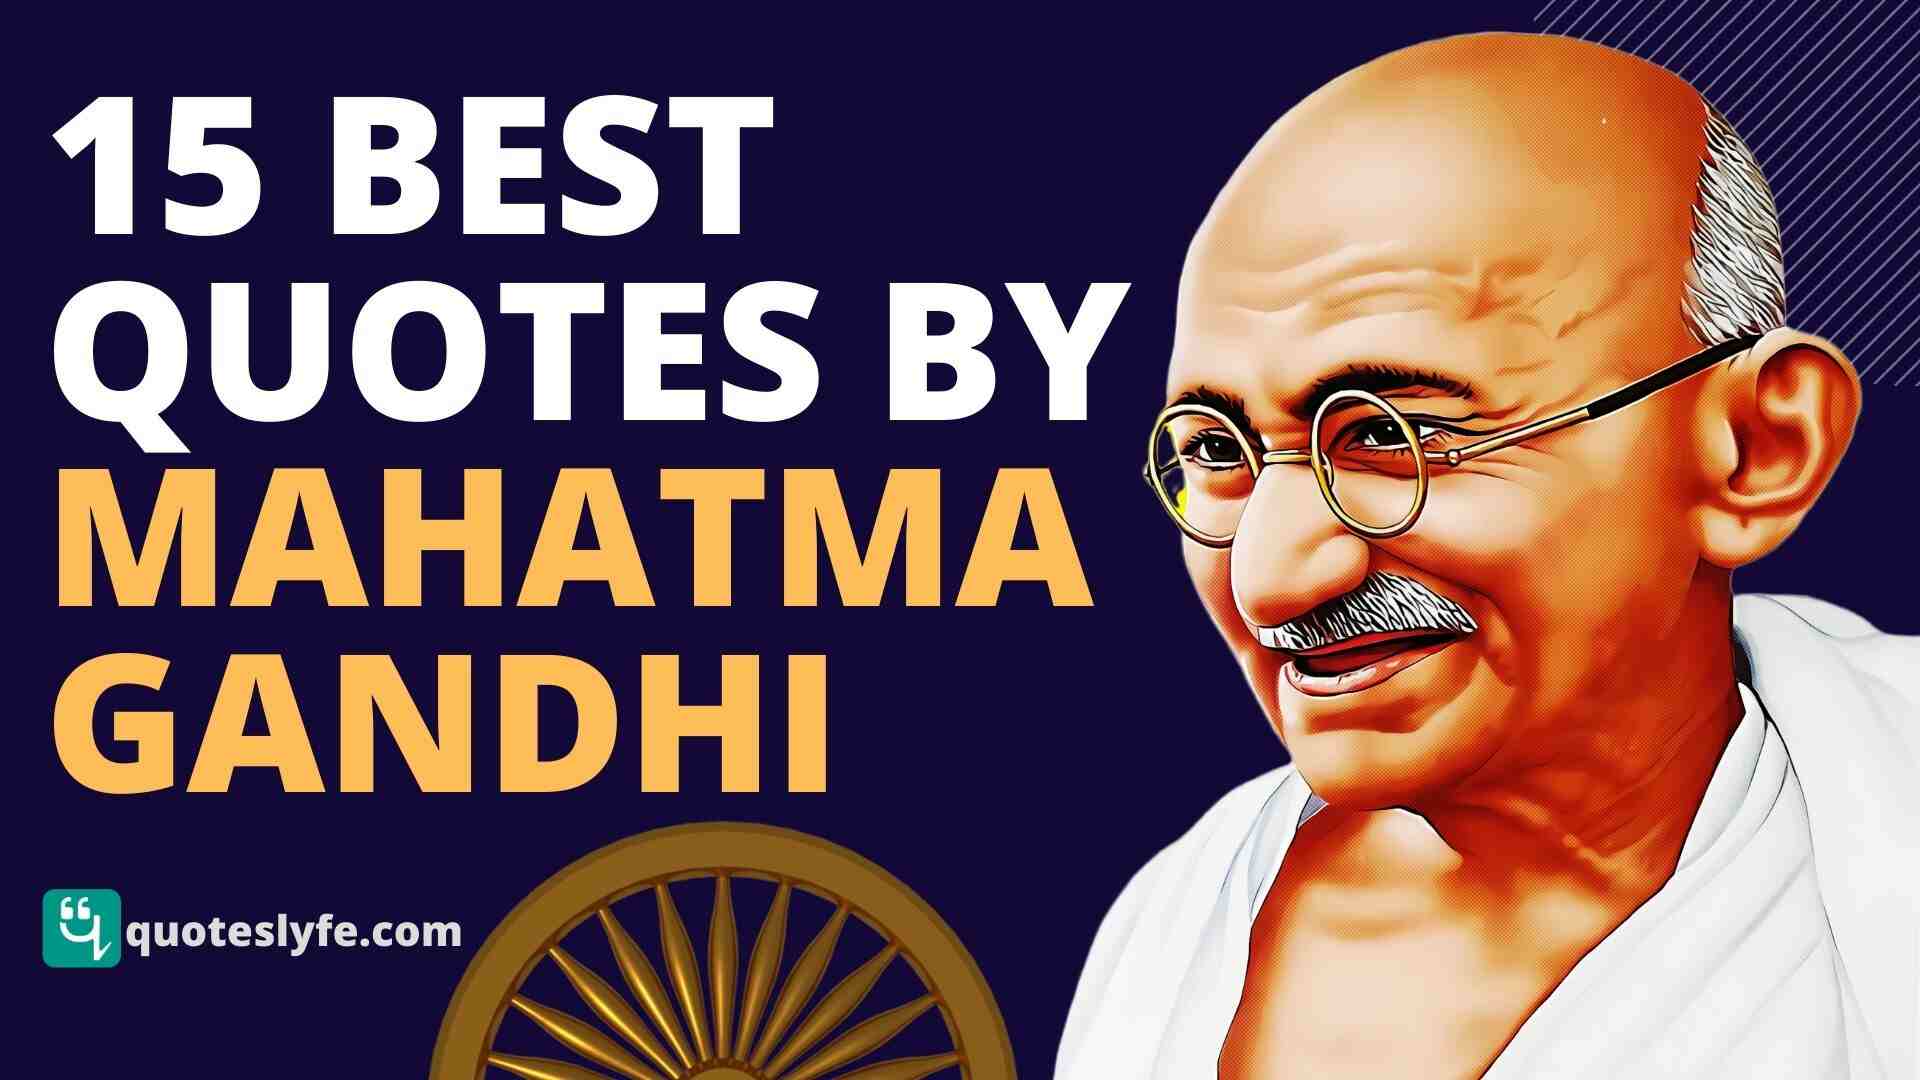 Top Motivational and Inspirational Mahatma Gandhi Quotes of All Time